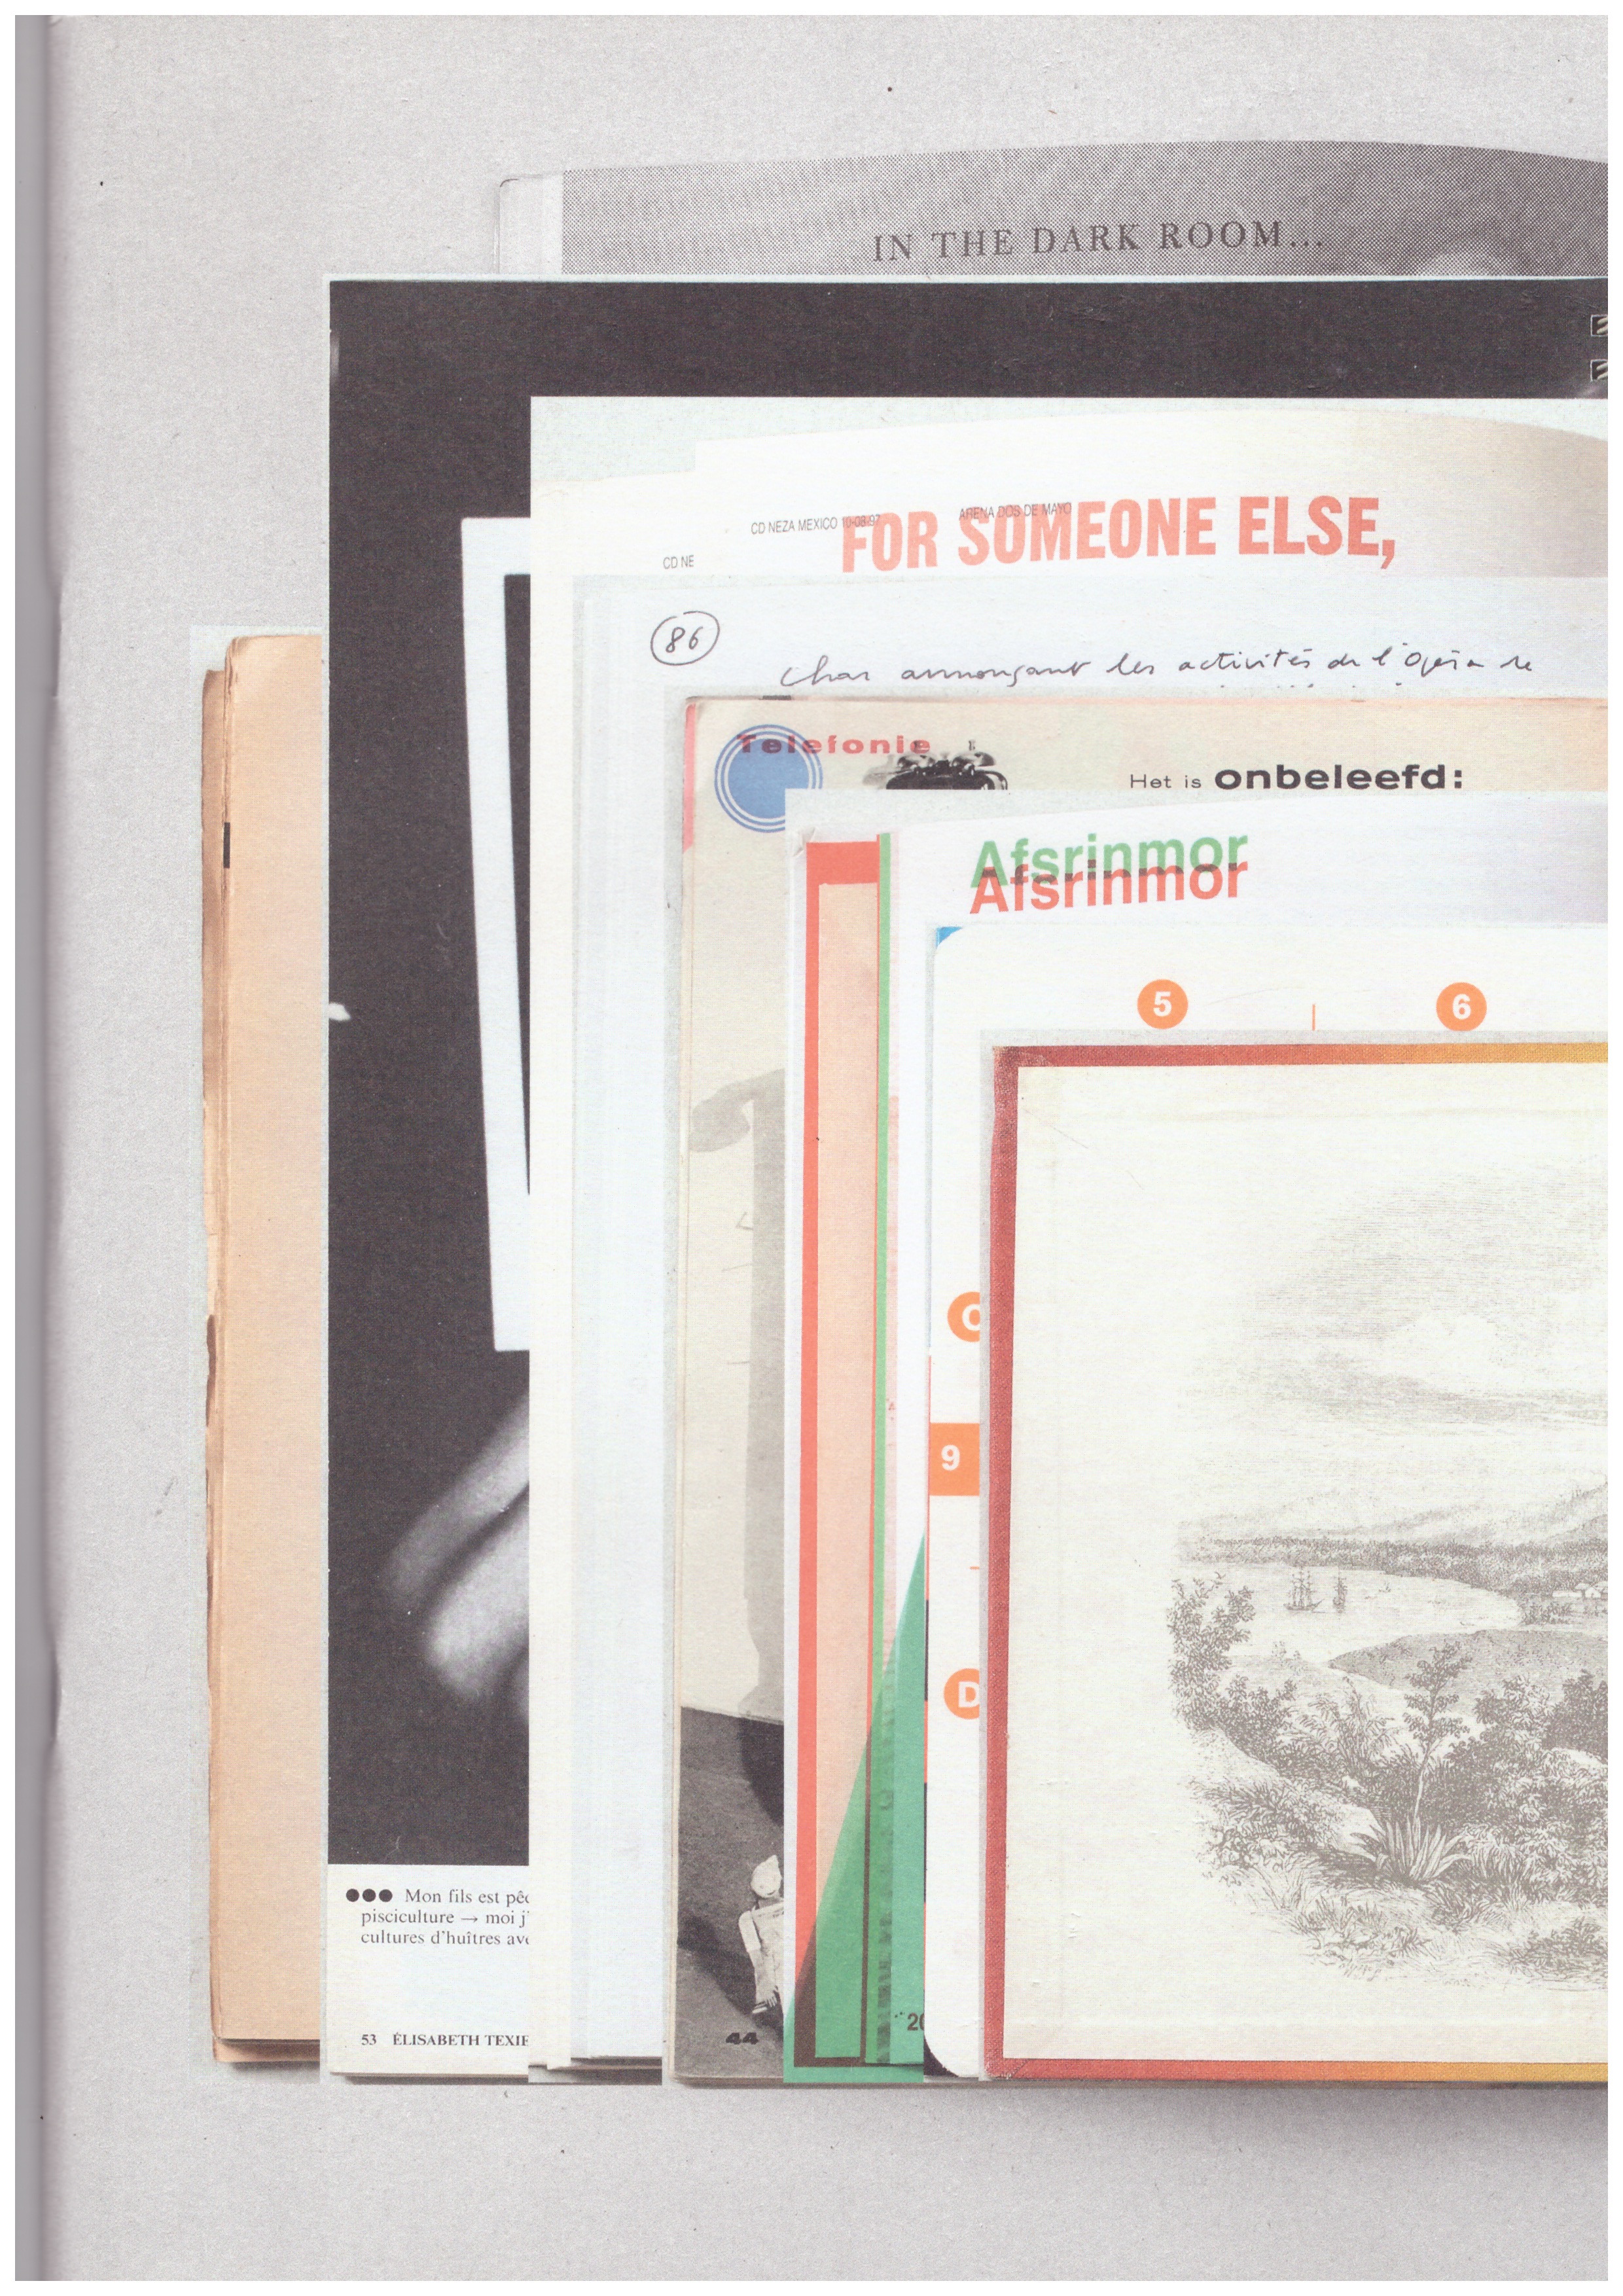 DE VRIES, Esther - Library of Inextricable Books